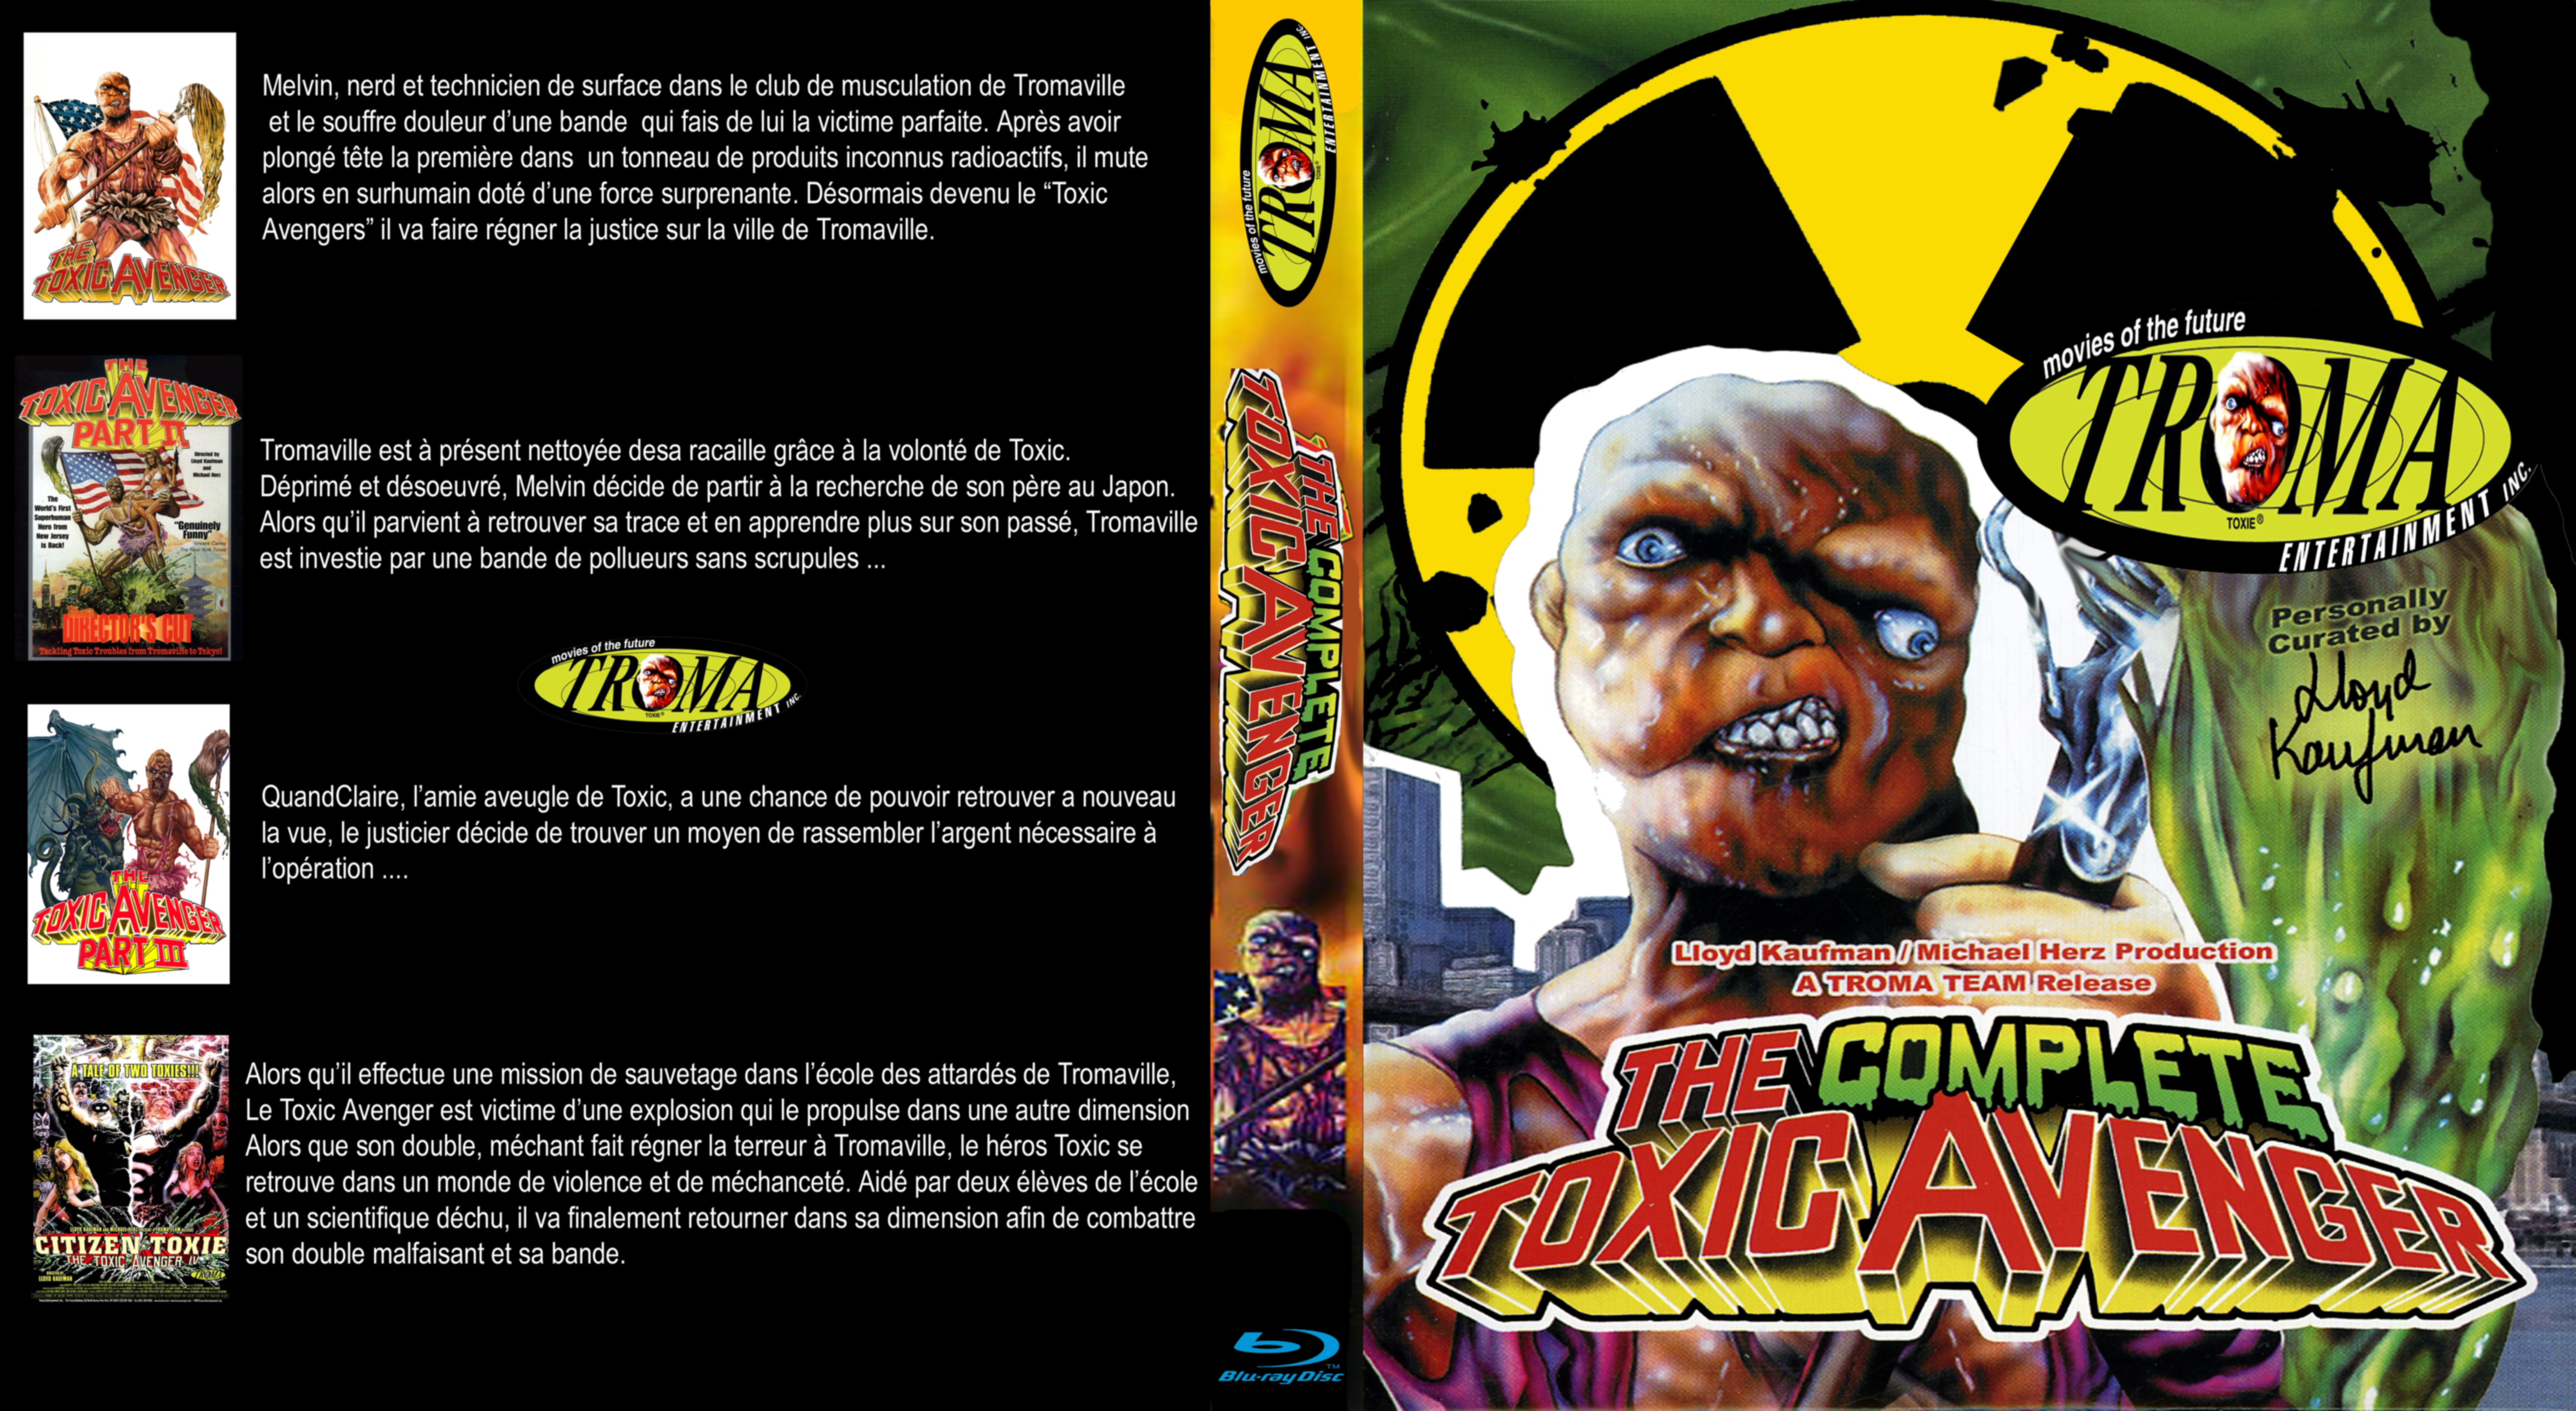 Jaquette DVD The complete toxic avenger custom (BLU-RAY)